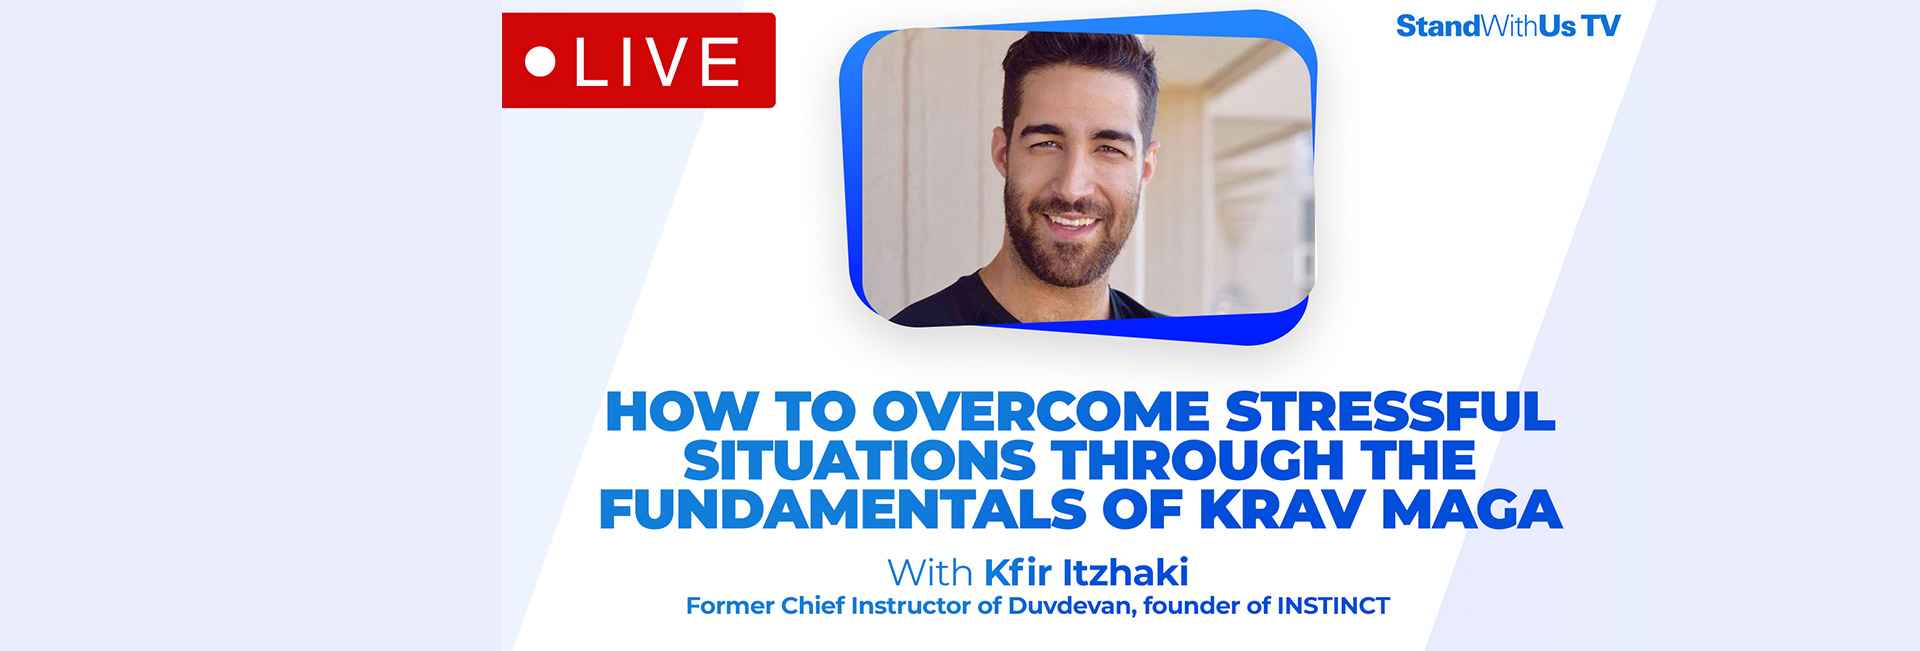 How to overcome stressful situations through the fundamentals of Krav Maga | SWUConnect #3